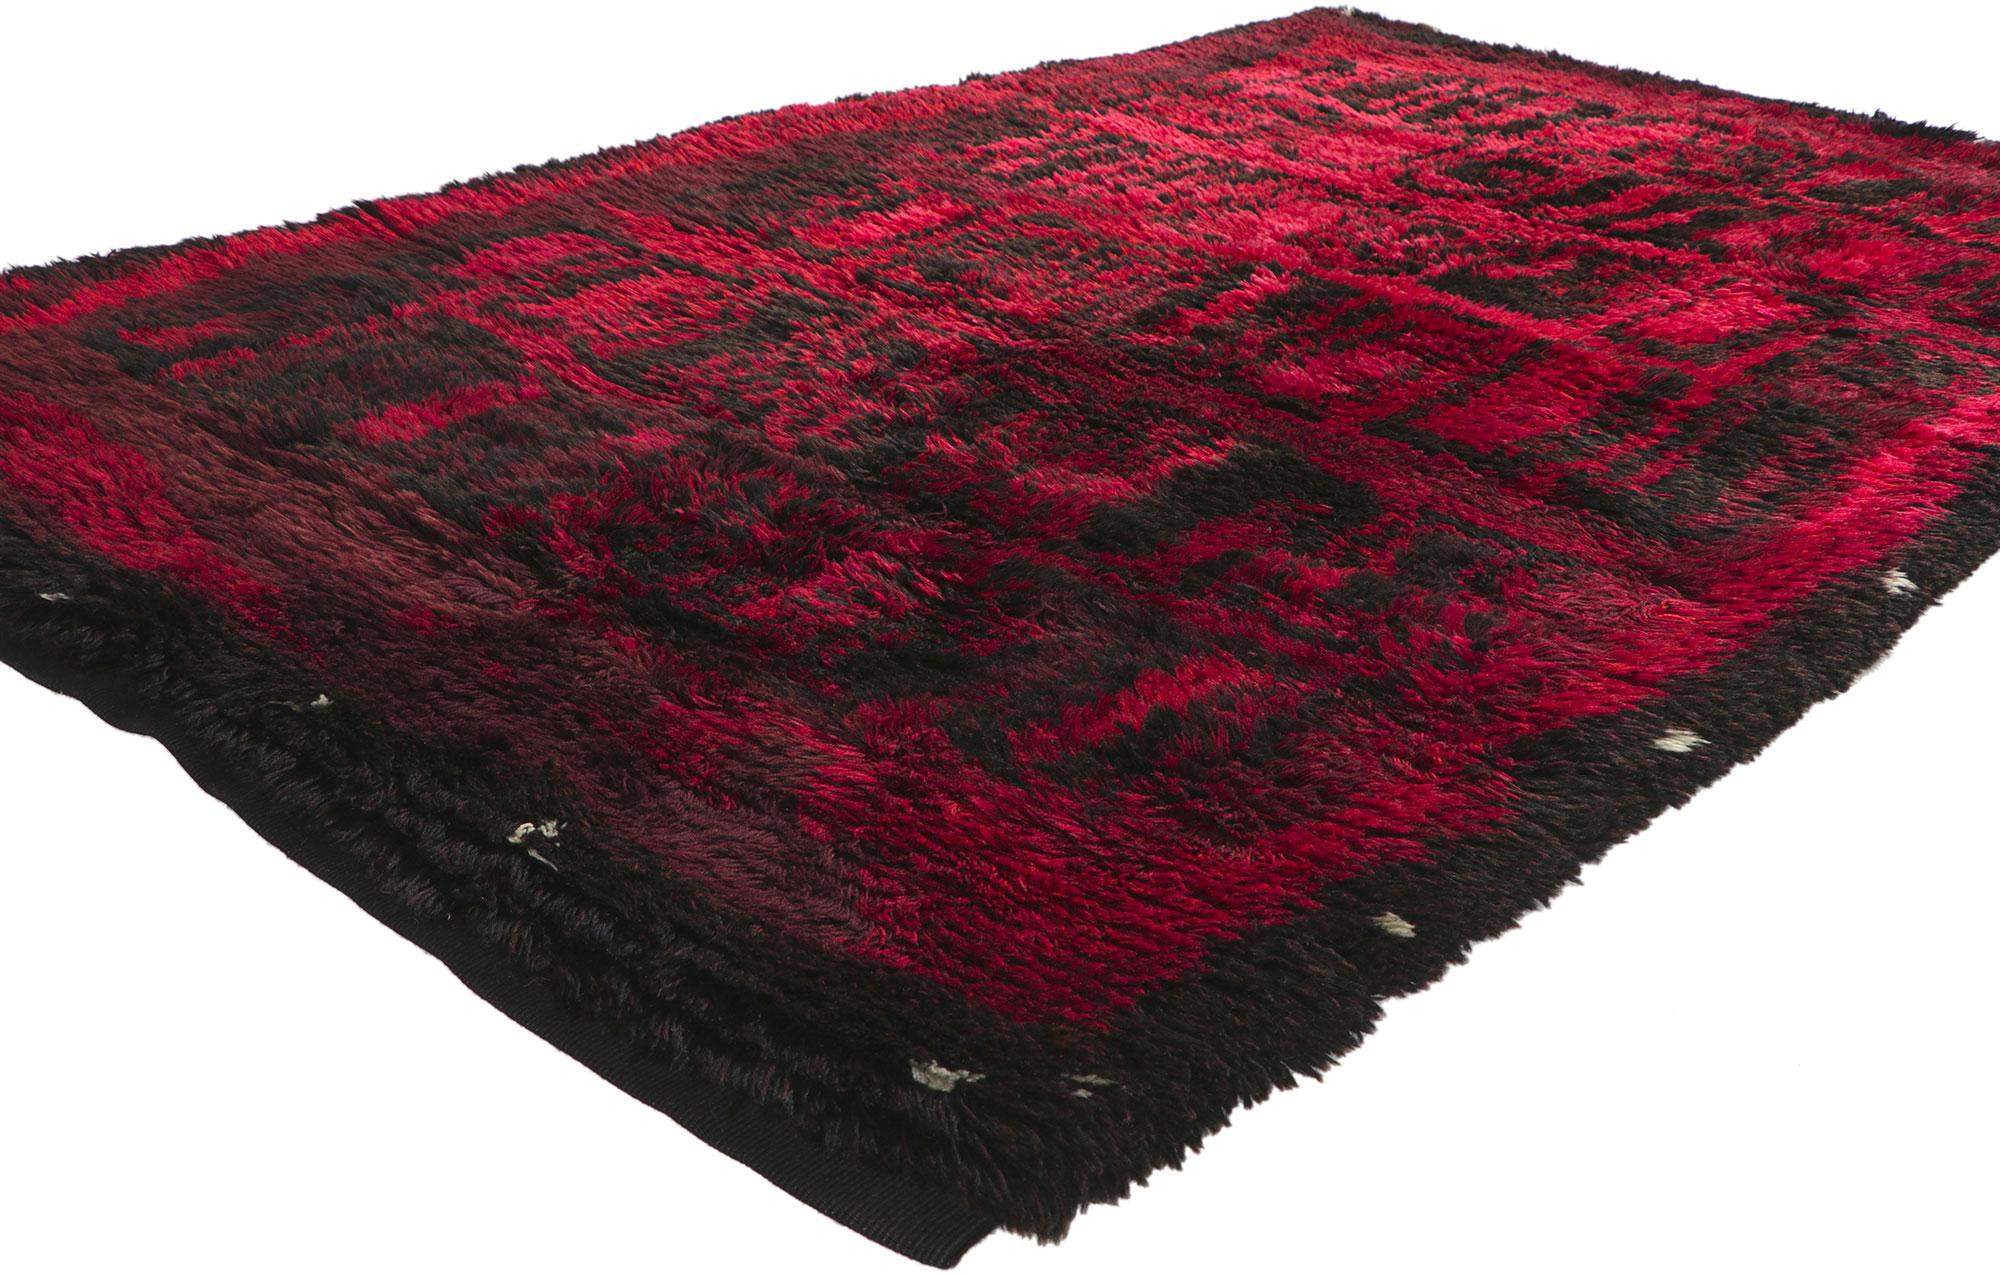 78469 Vintage Finnish Rya Ryijy Rug by Kirsti Ilvessalo, 04'03 x 06'10. Kirsti Ilvessalo is a notable Finnish textile artist recognized for her innovative approach to Ryijy rugs, a traditional form of Finnish folk textiles known for their thick pile